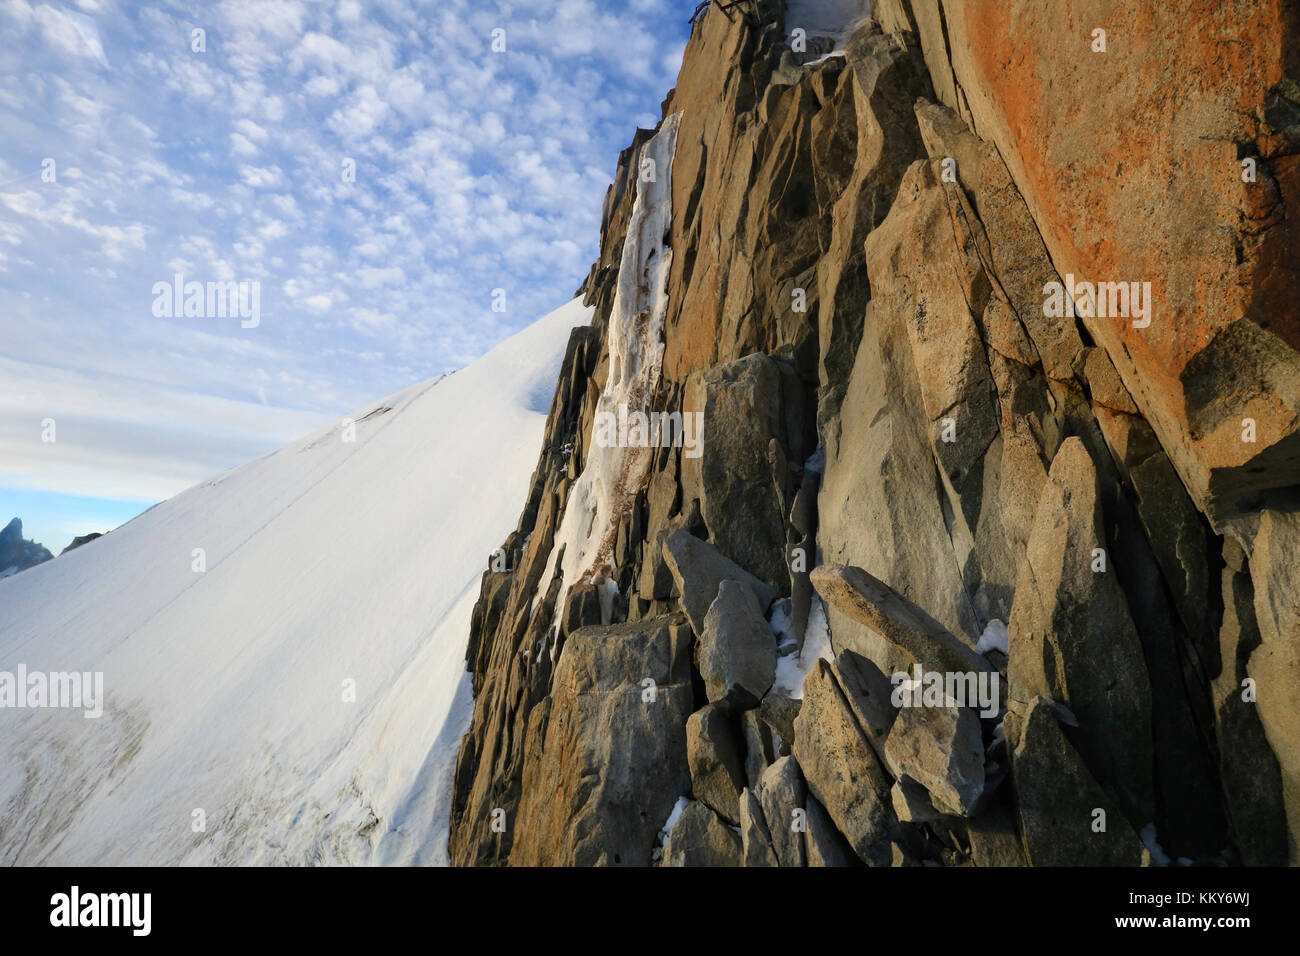 Chamonix France, Rocky outcrop at the top of the mountain. Stock Photo